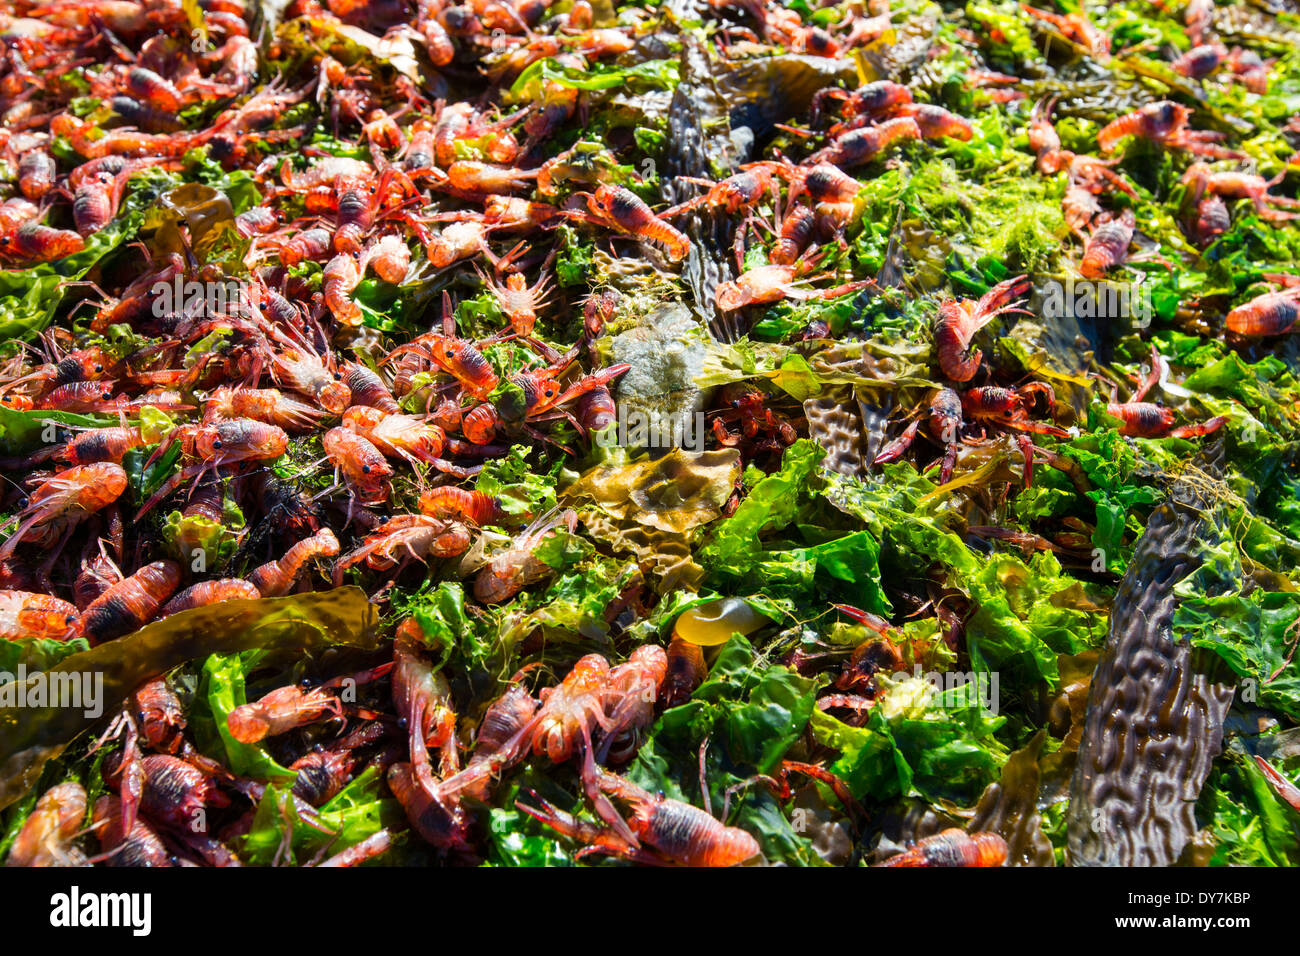 Subantarctic Squat Lobsters washed up on a beach in Ushuaia in Argentina. Stock Photo